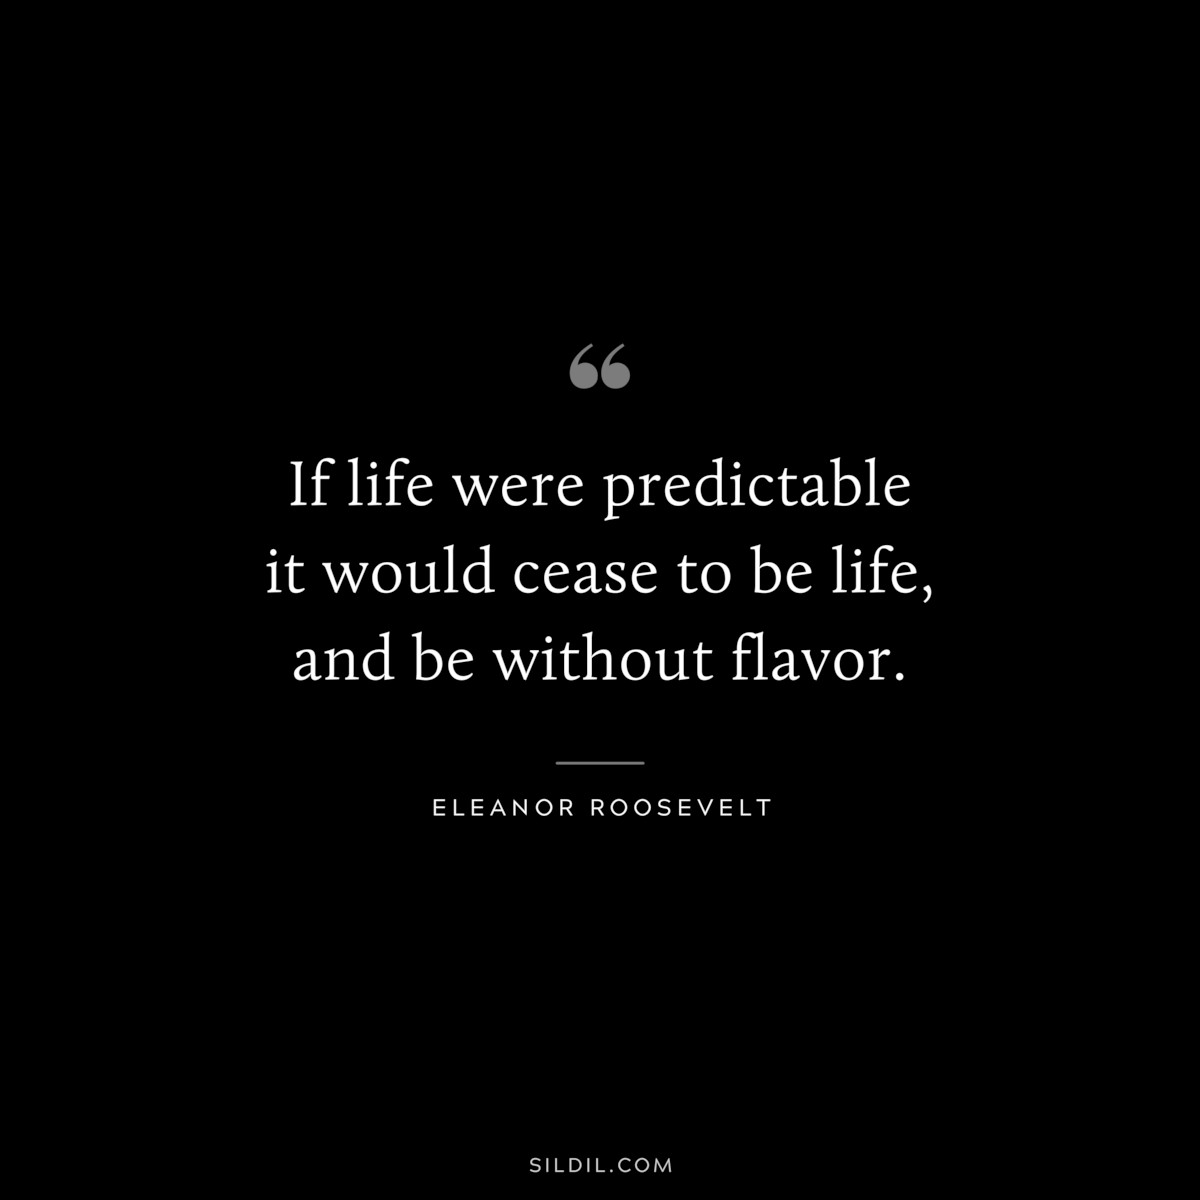 If life were predictable it would cease to be life, and be without flavor. ― Eleanor Roosevelt